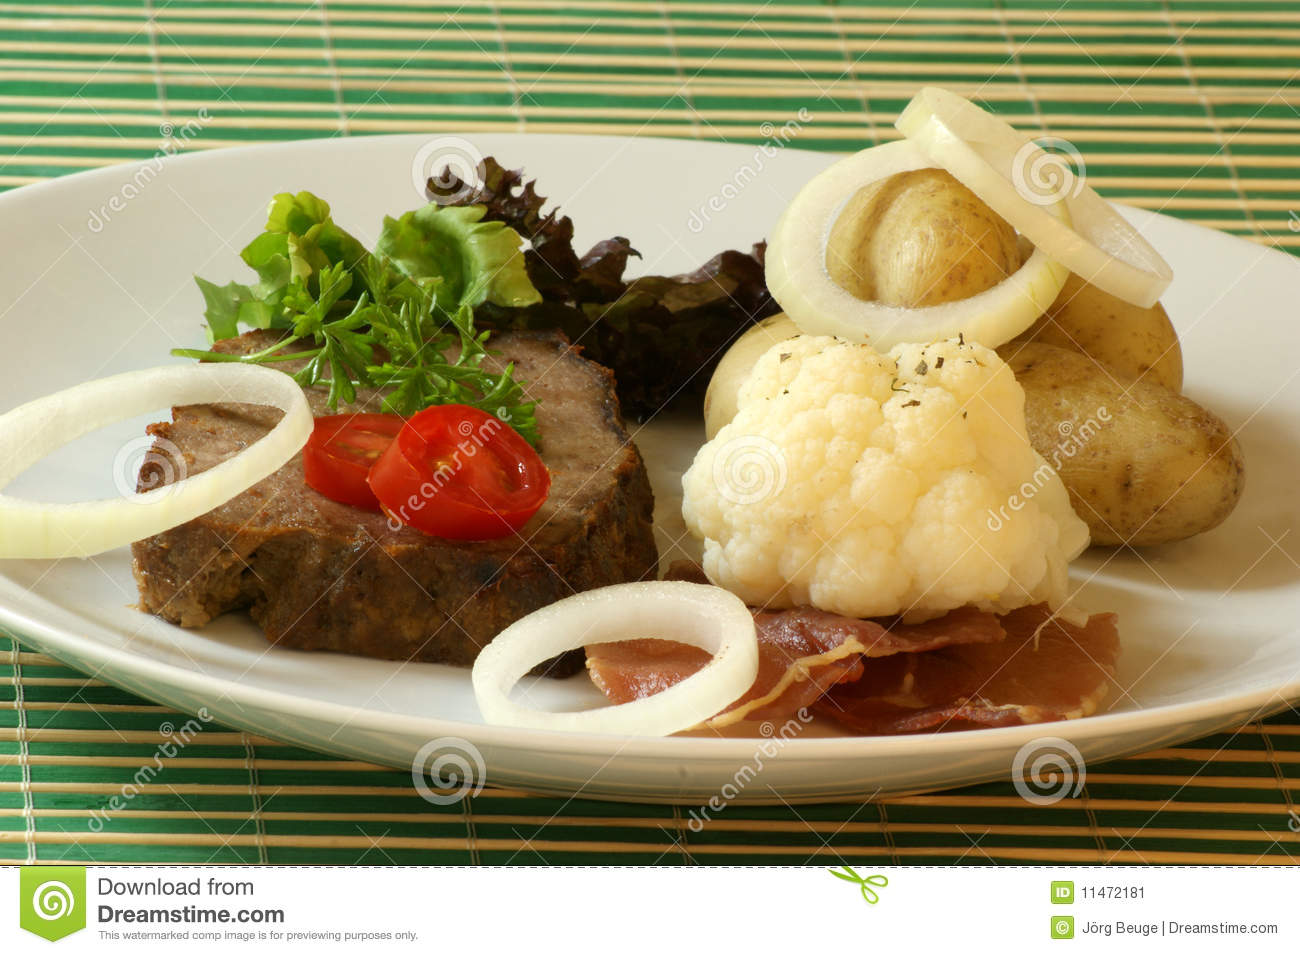 Sliced Meat Loaf With Egetable On A Plate Stock Image   Image